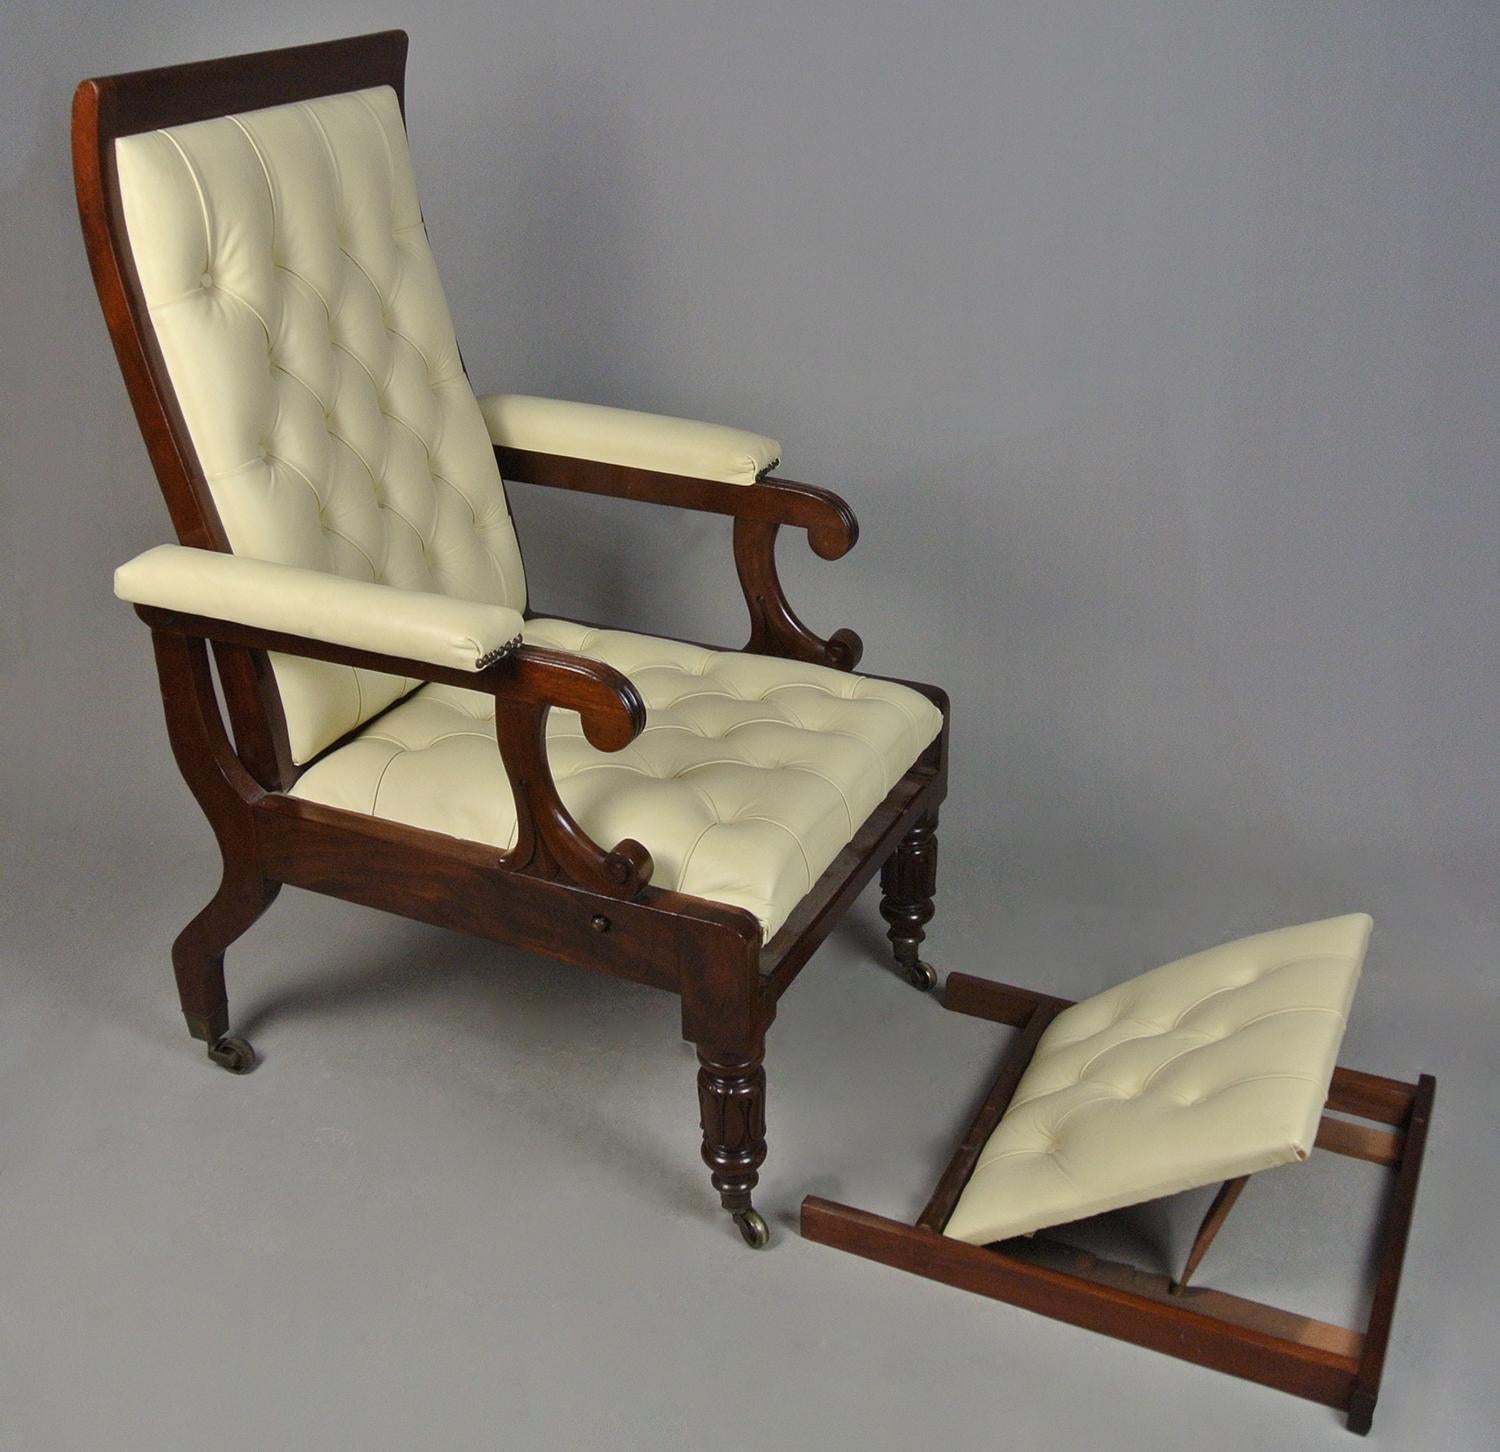 Regency Solid Mahogany ‘Daws Patent’ Reclining Chair c. 1830 For Sale 1